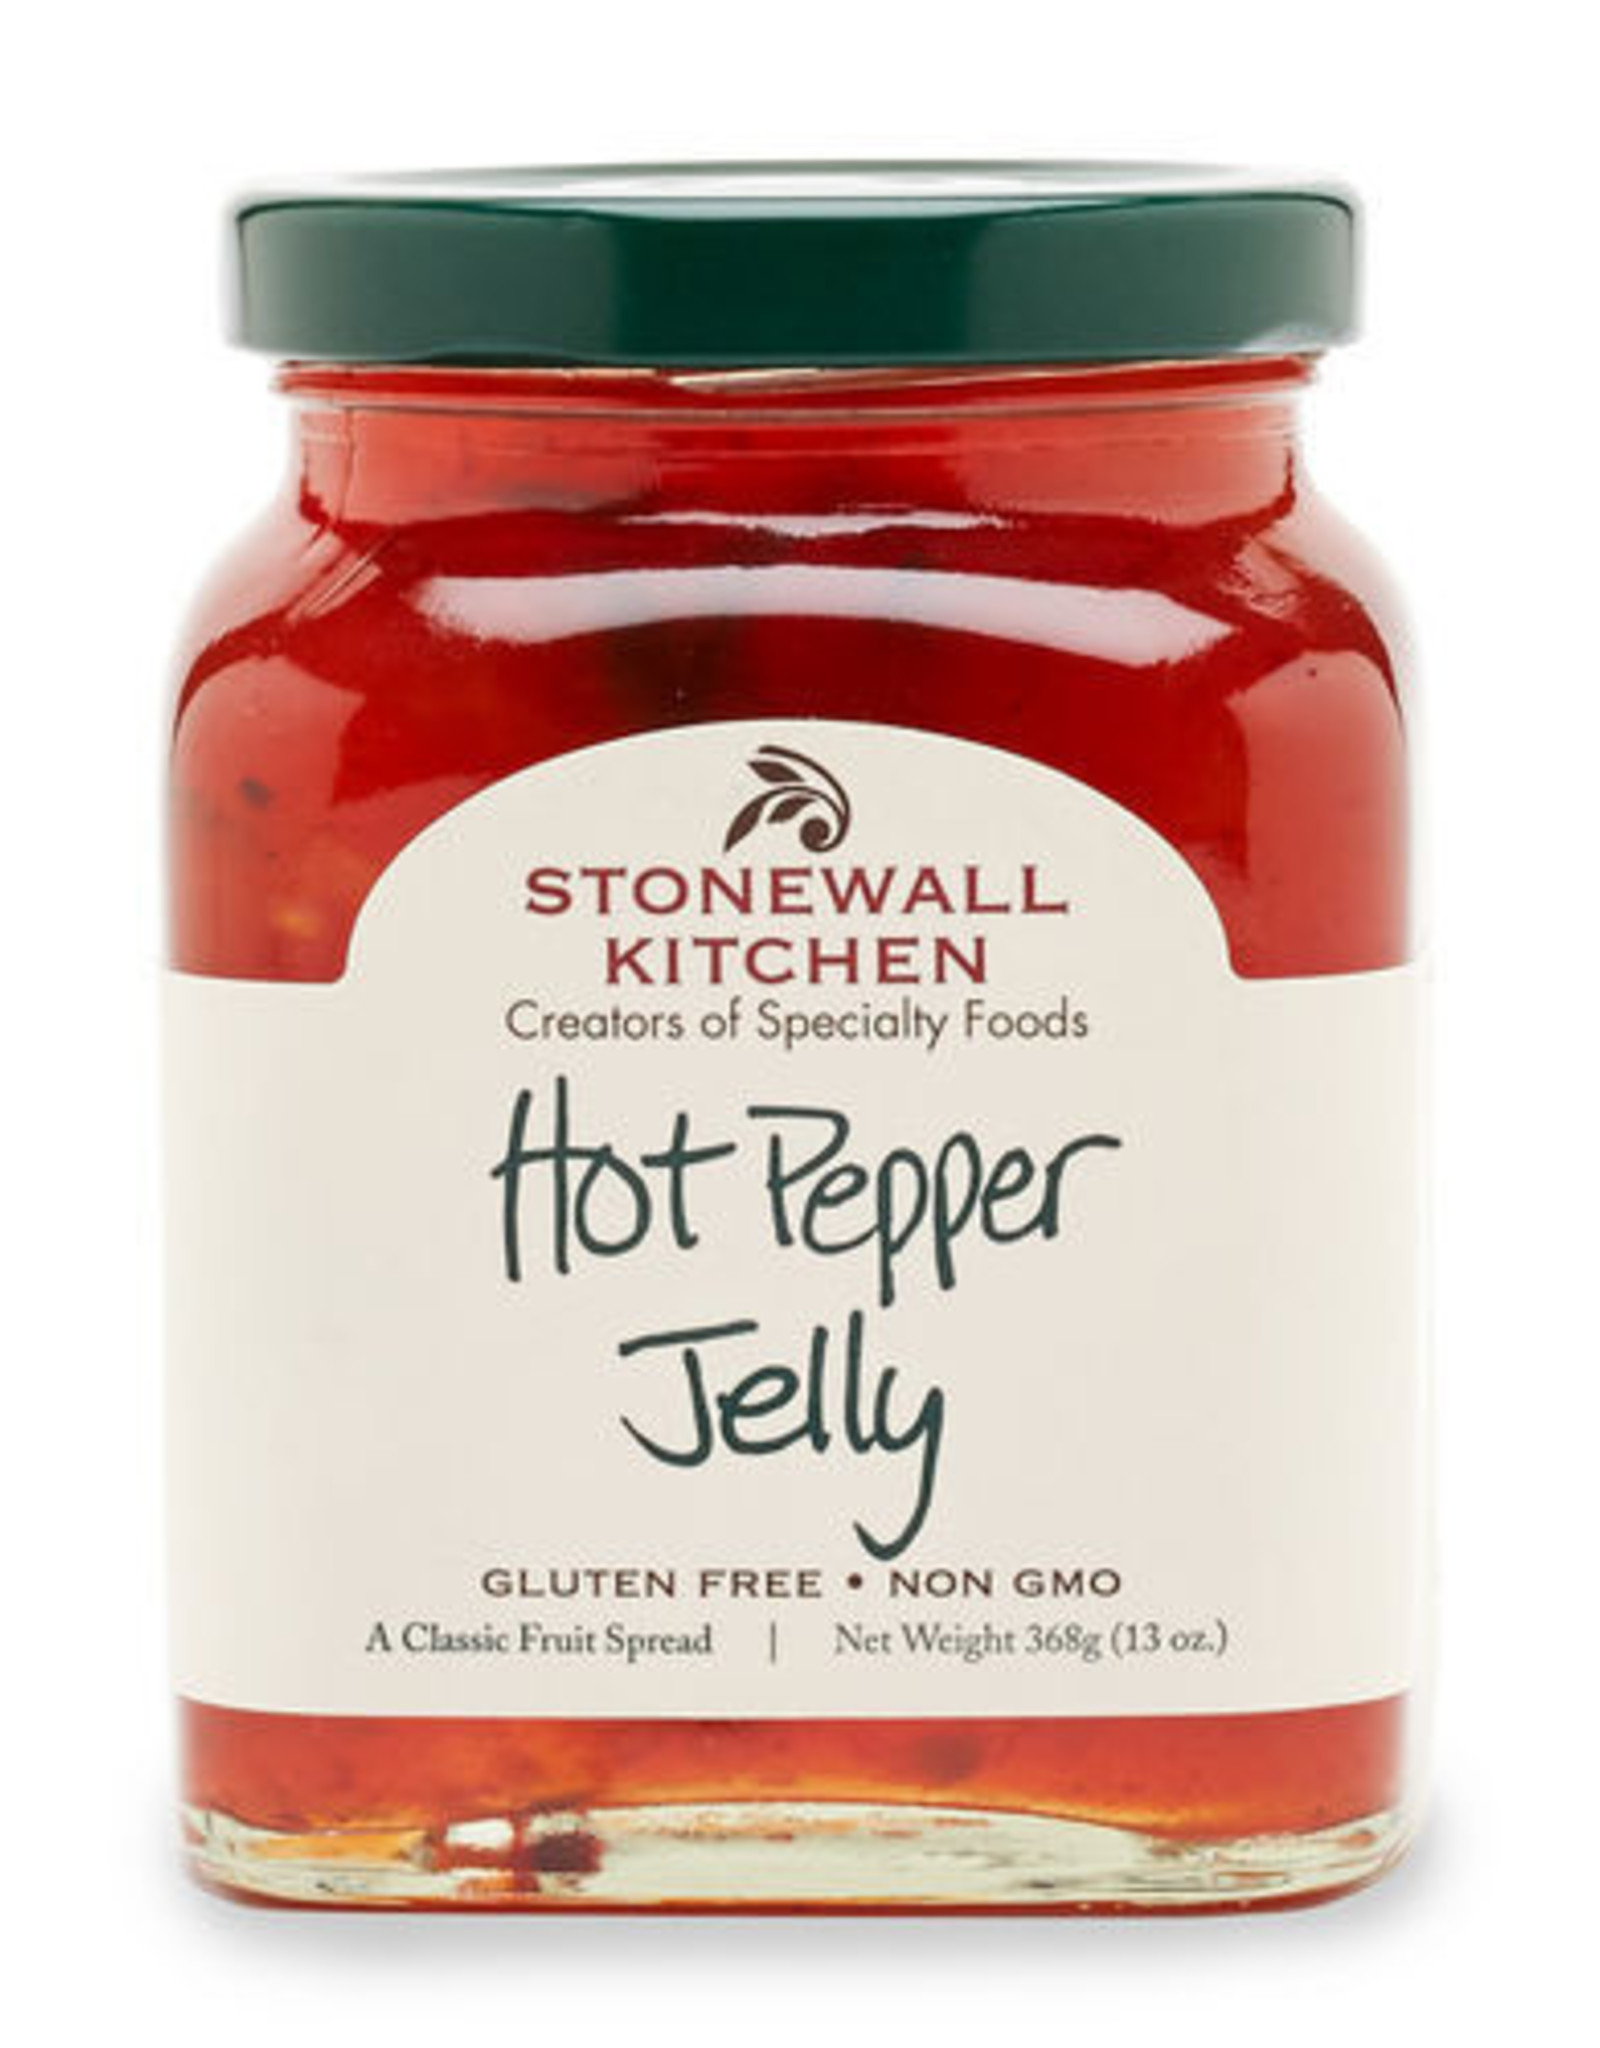 Stonewall Kitchen HOT PEPPER JELLY - Fruit Spread